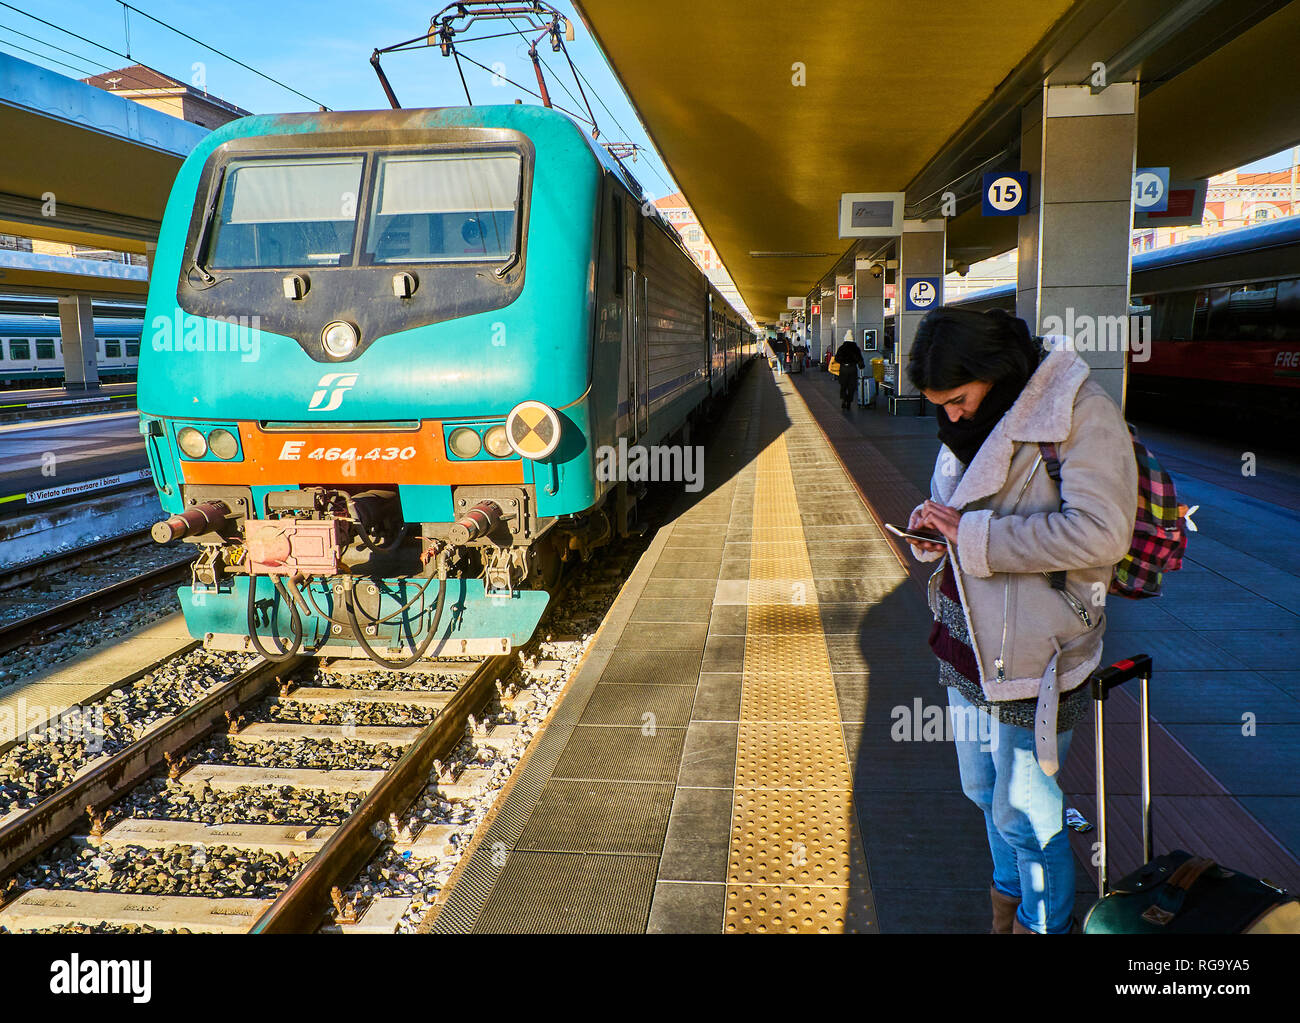 Turin, Italy - December 30, 2018. A tourist consulting his mobile phone in front of a train of Trenitalia in an Italian train station. Turin, Piedmont Stock Photo